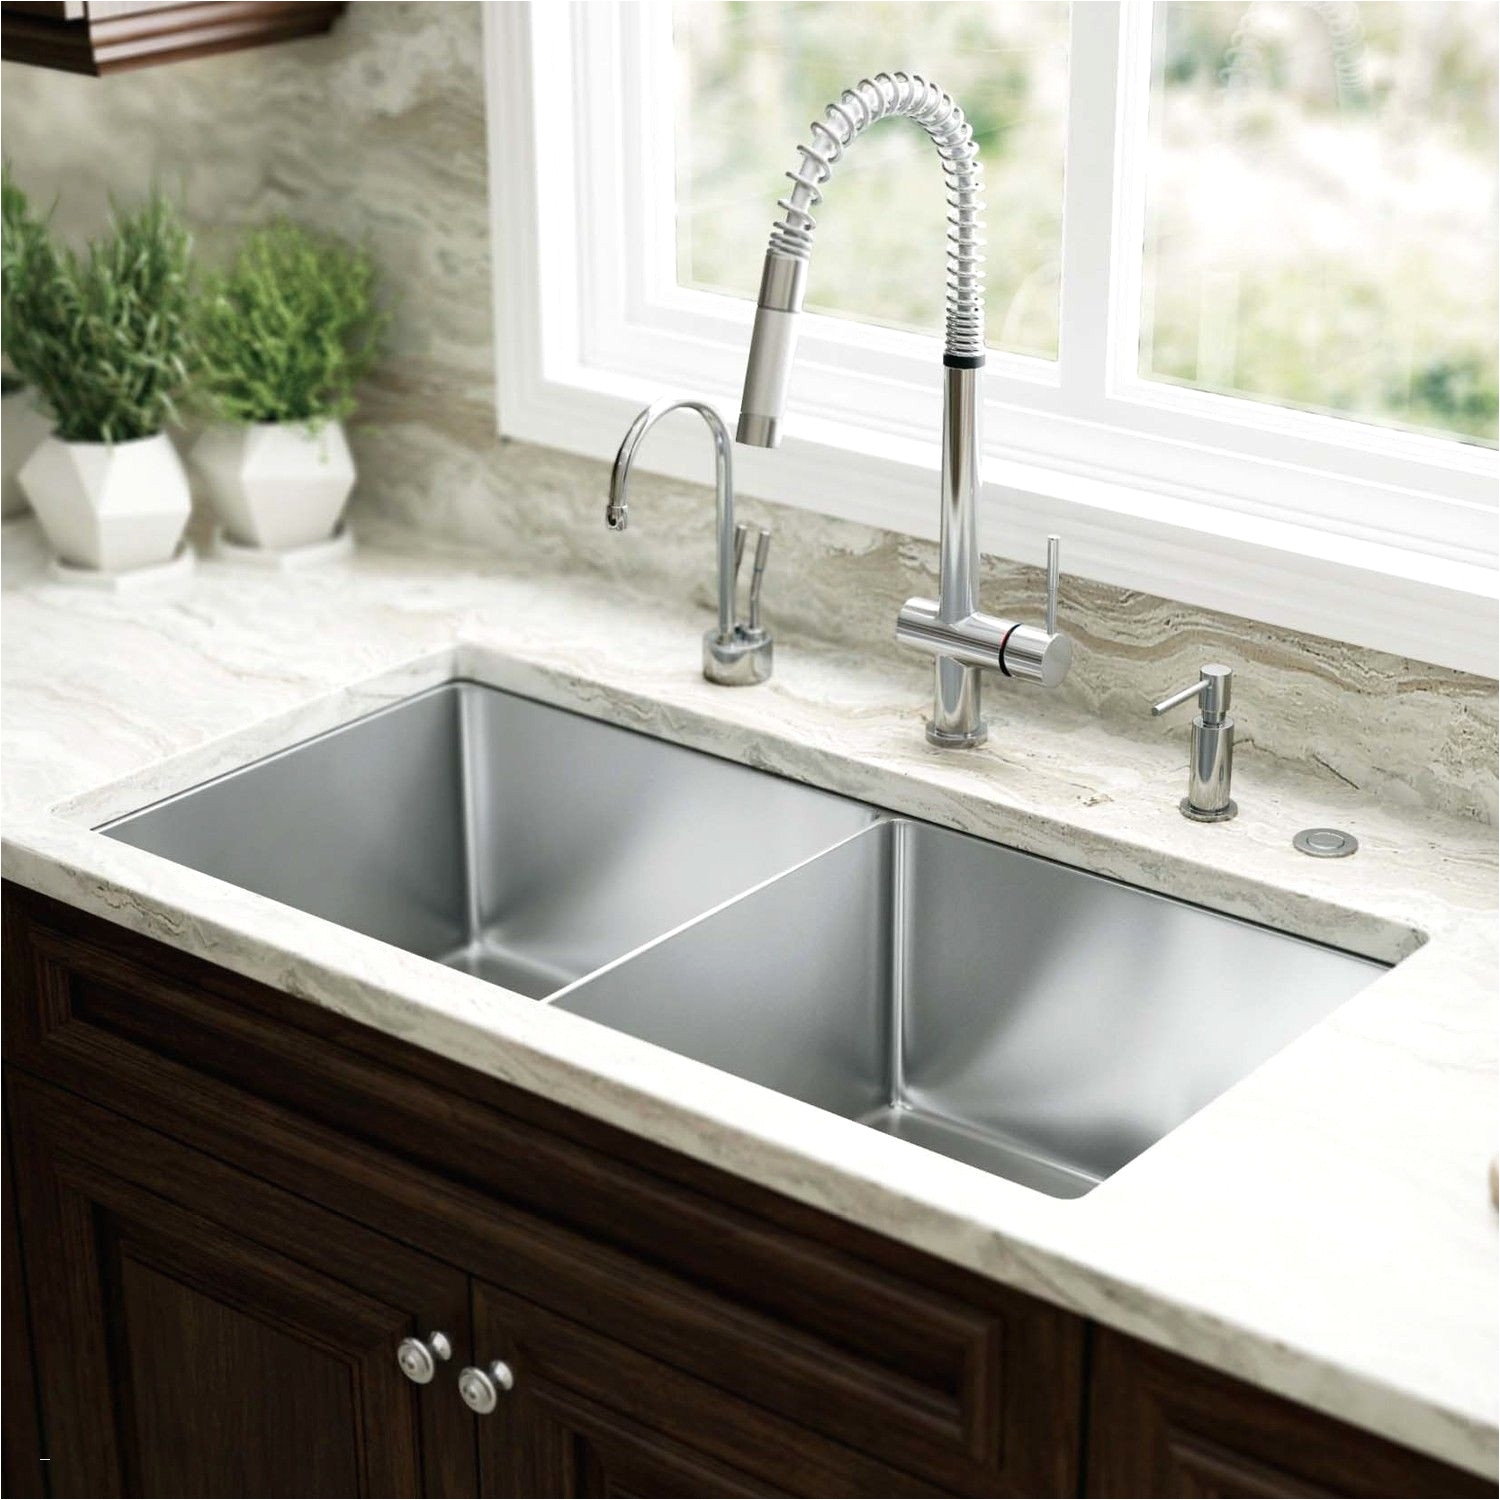 Lowes Complete Home Decorating Kitchen Sink Lowes Callebitcoin Co